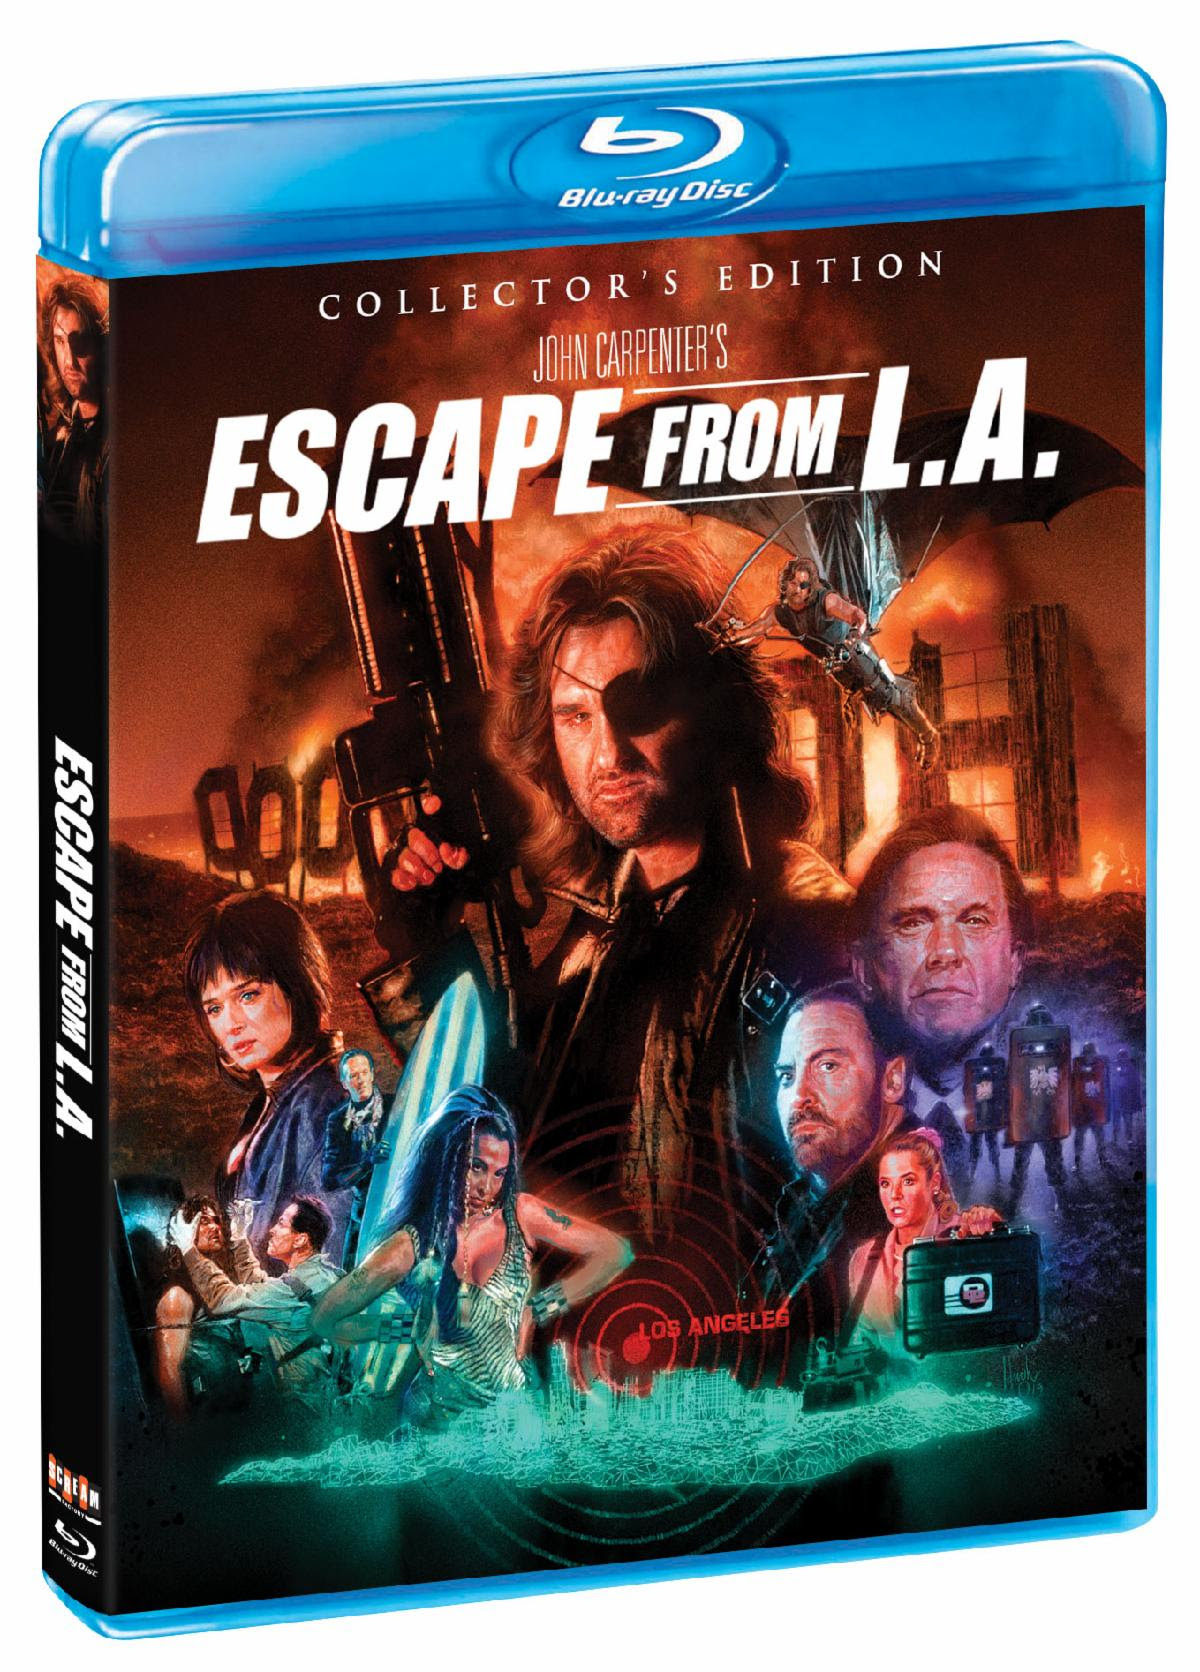 [News] ESCAPE FROM L.A. Collector's Edition Blu-Ray Coming May 26!